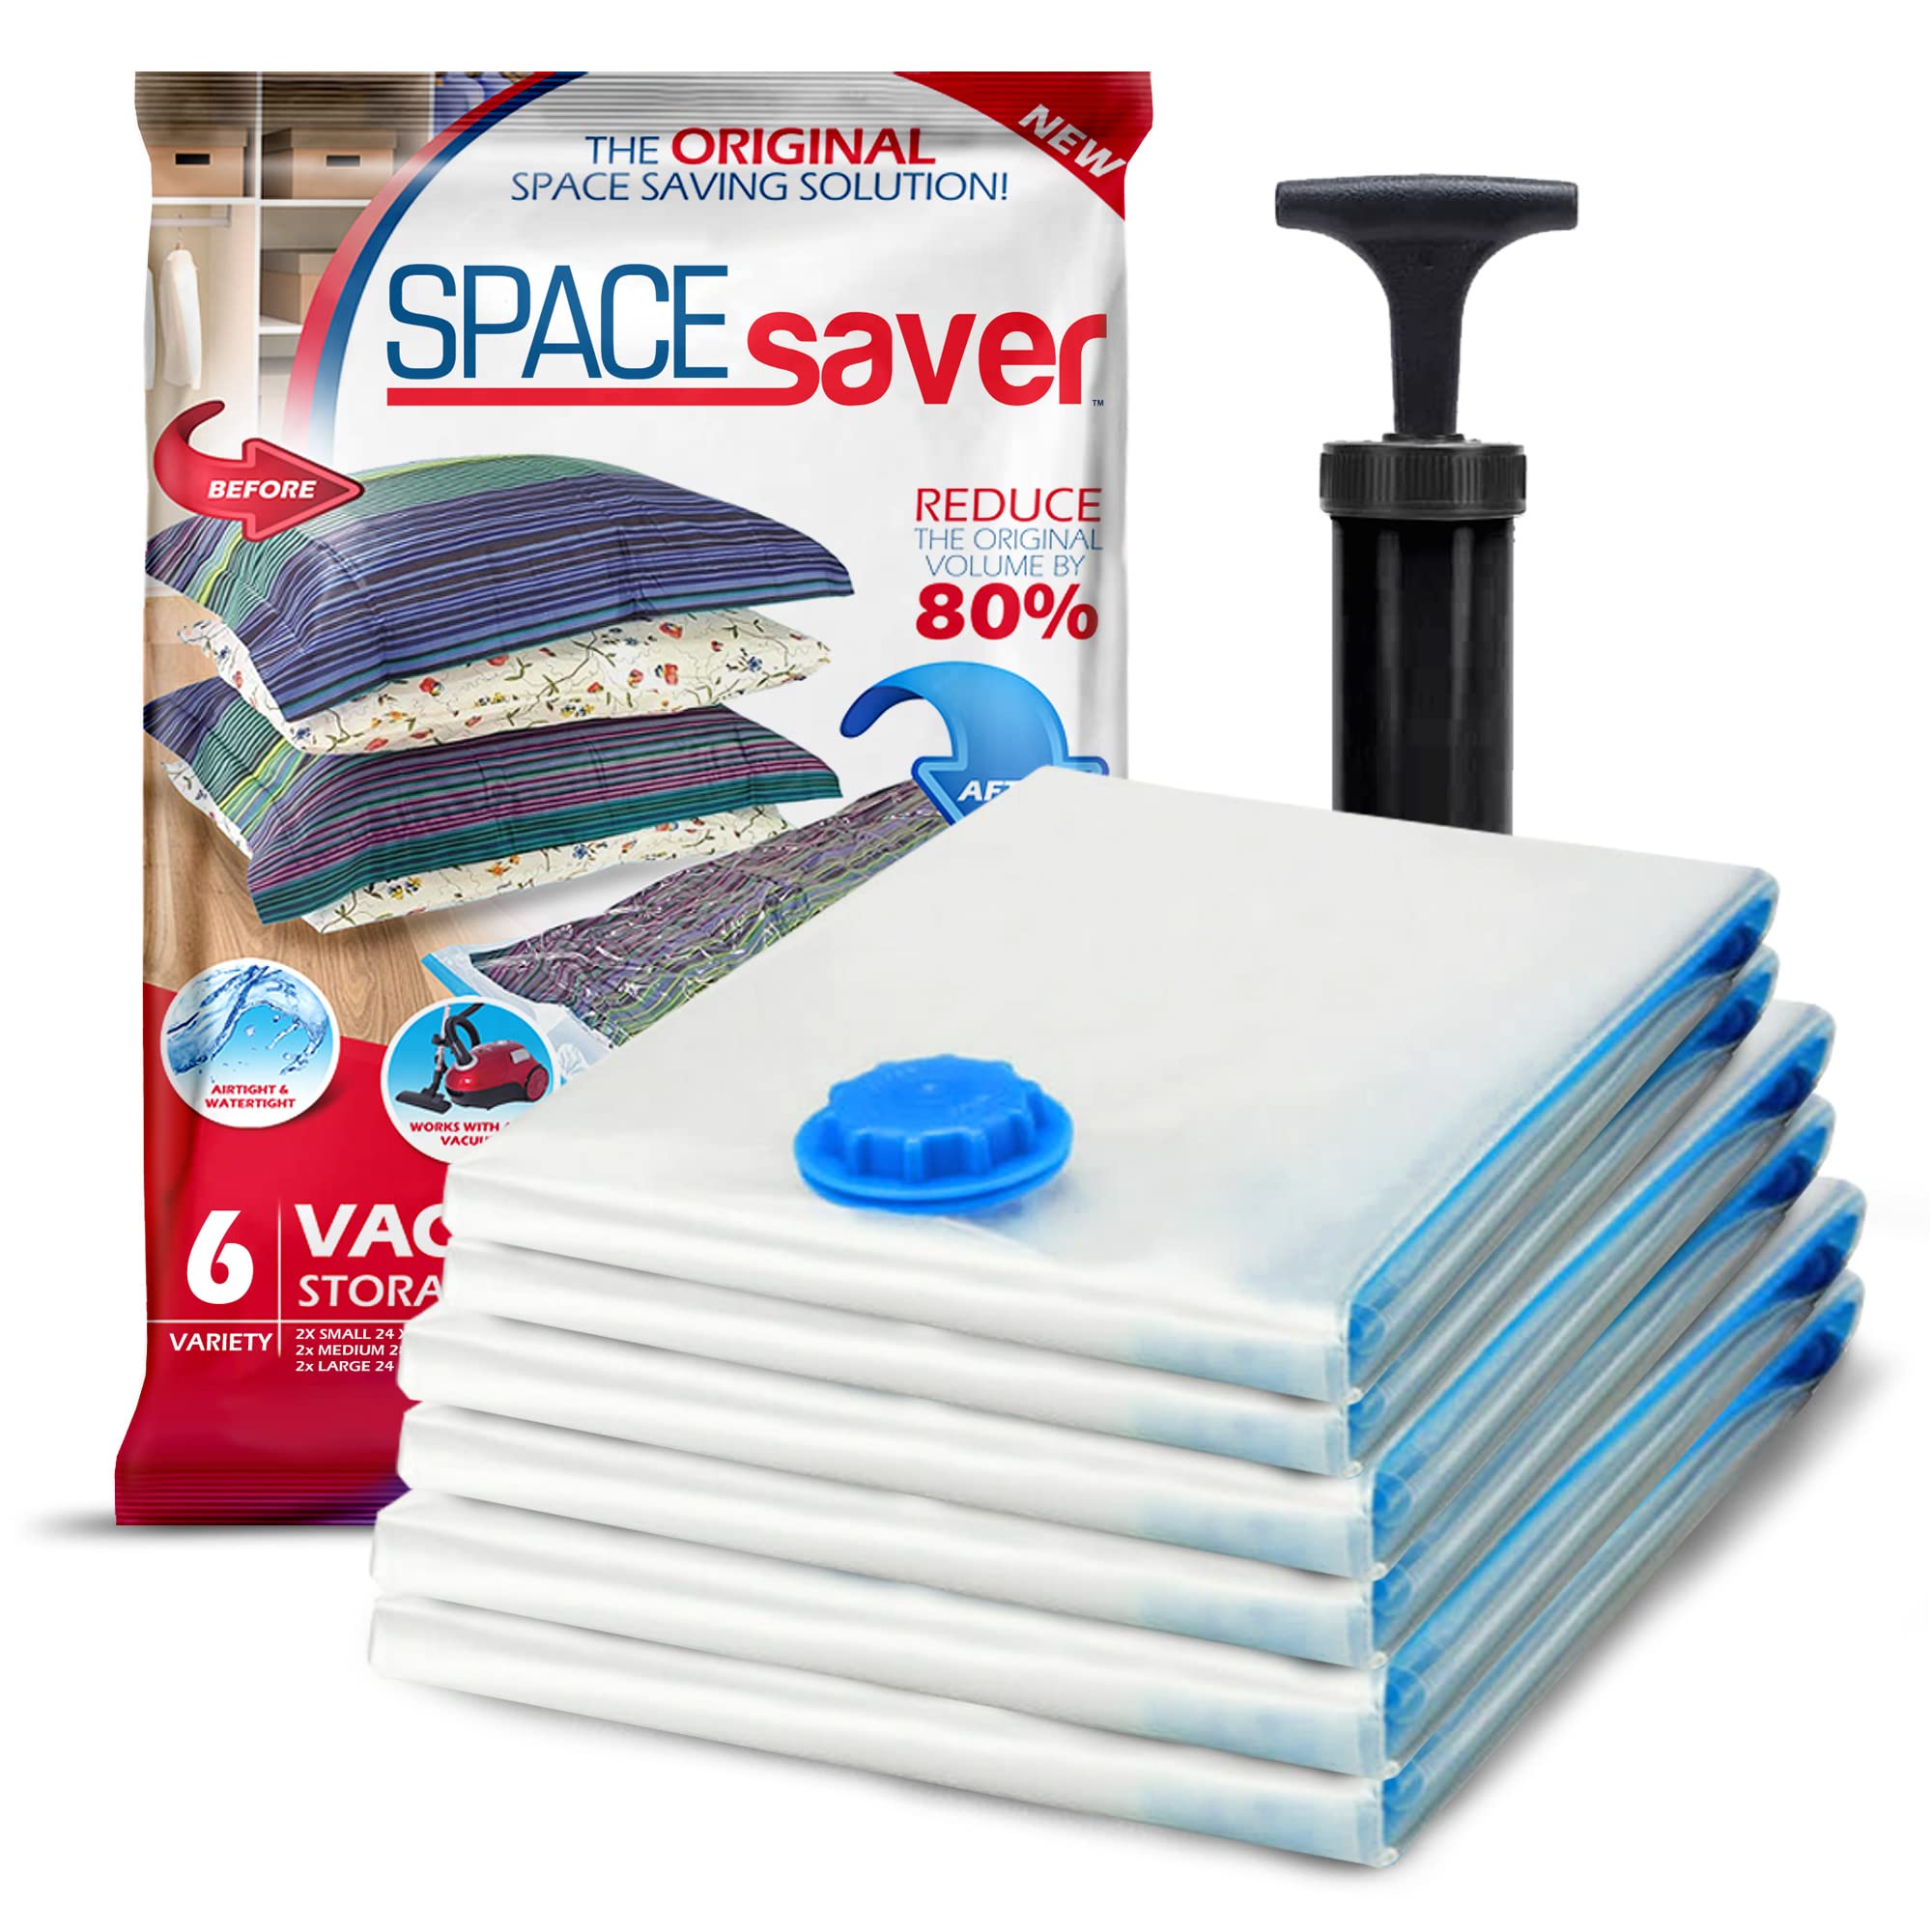 Vacuum Storage Bags. Hand-Pump for Travel! Zip Seal and Seal Valve! Vacuum  Sealer Bags for Comforters, Blankets, Bedding, Clothing | Catch.com.au